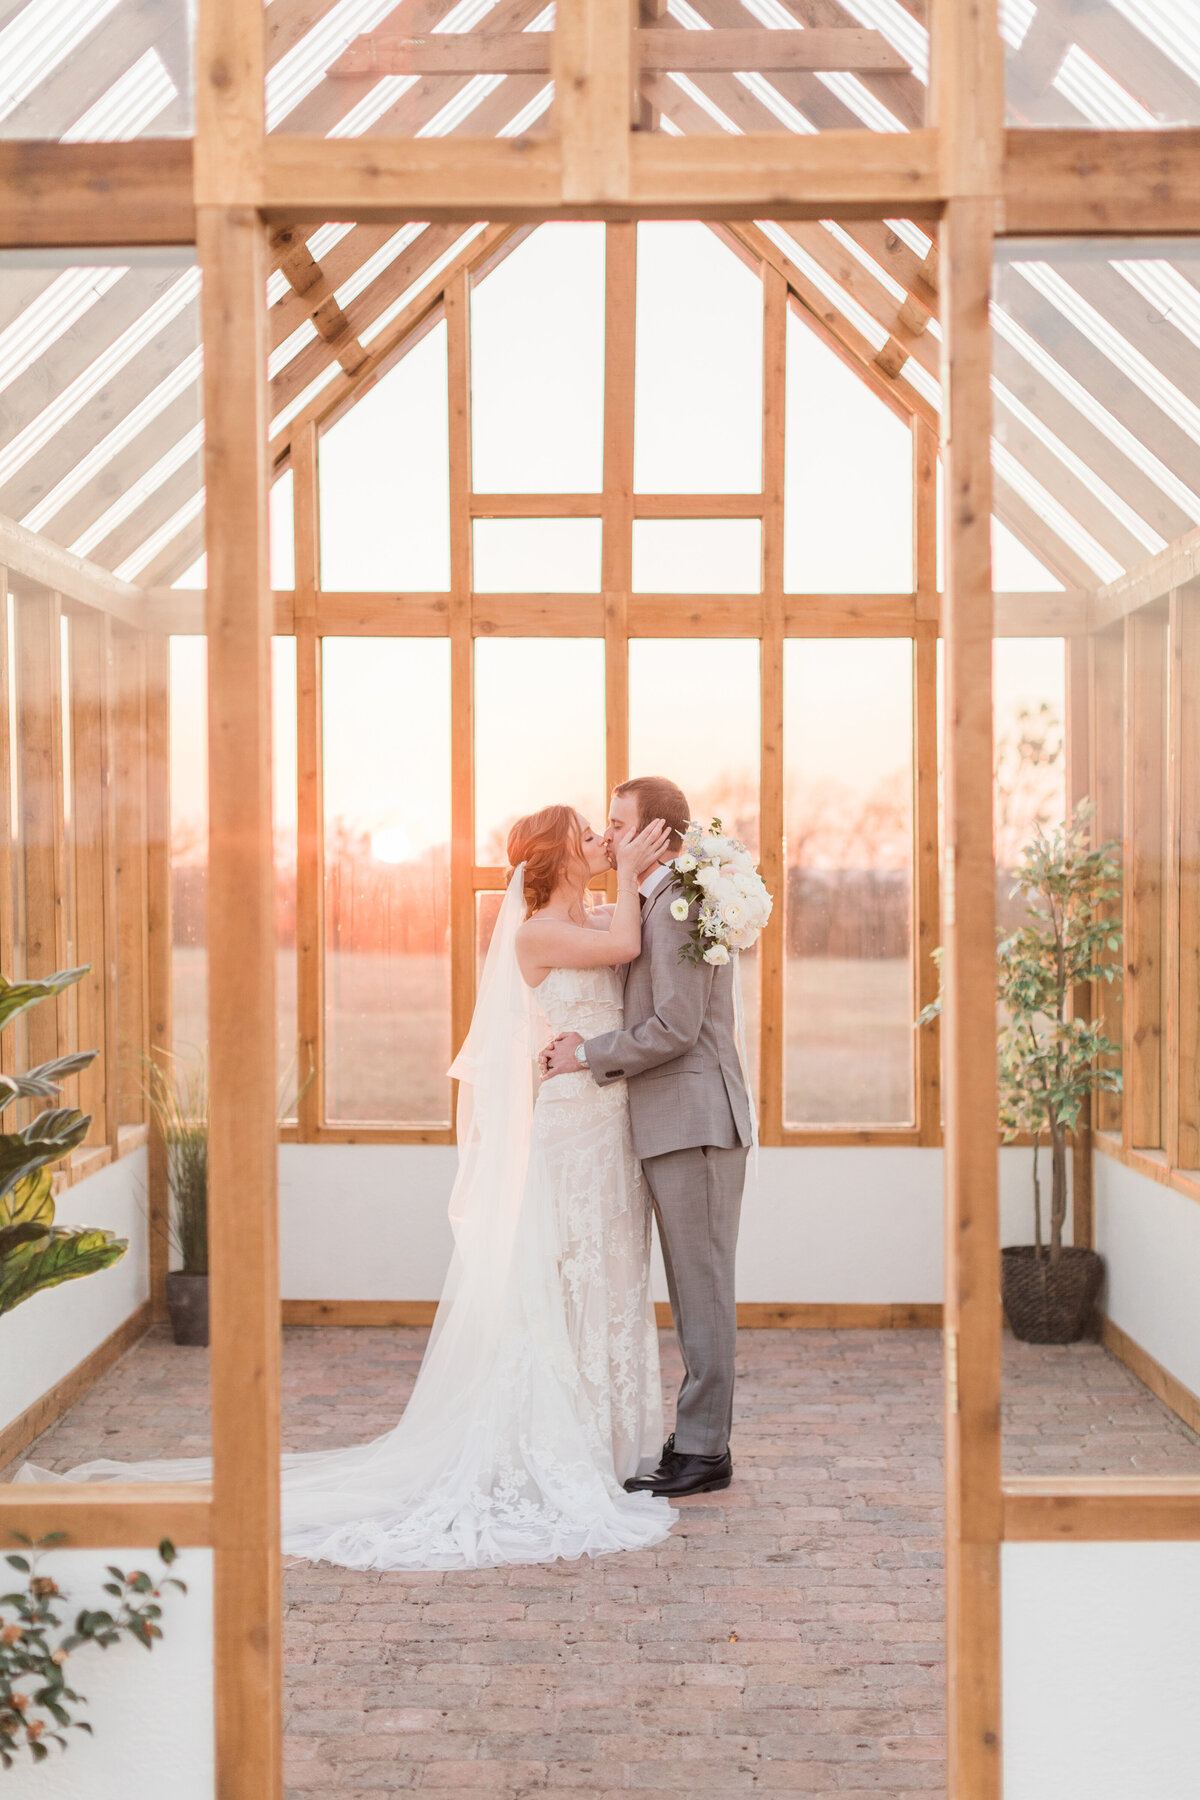 Vow Renewal at Stem and Light